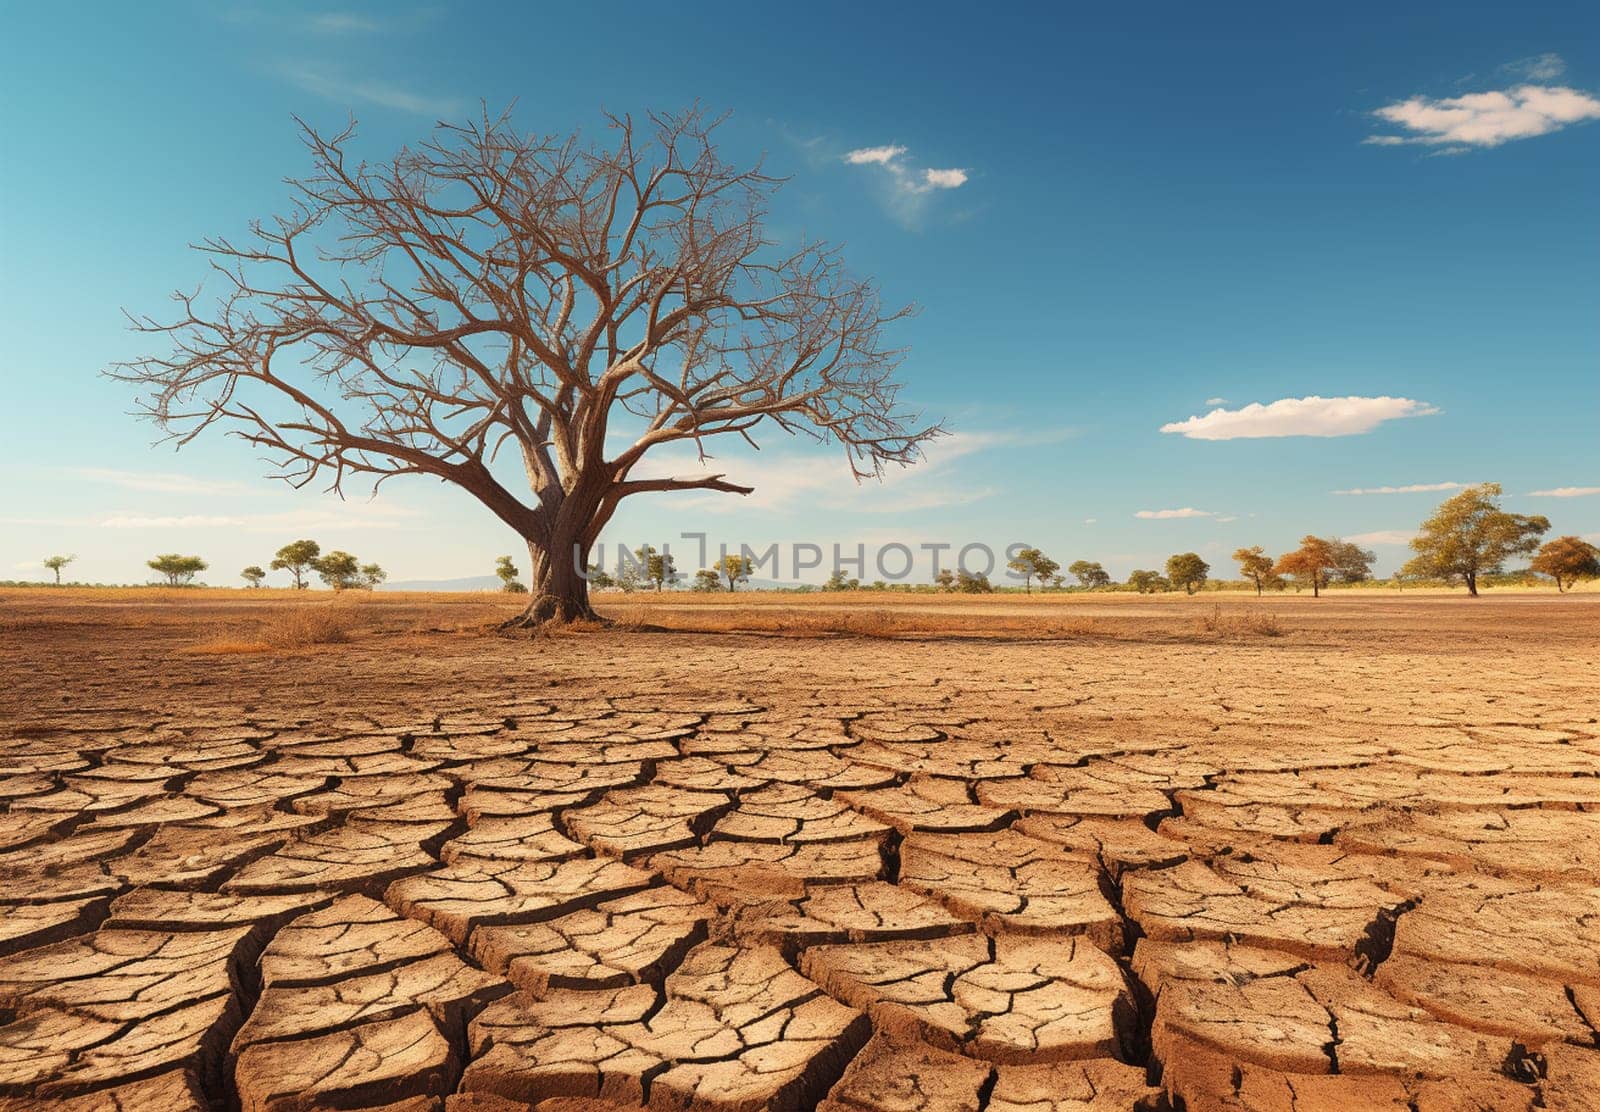 Dry waterless wasteland. Dead tree stub. Sun beams on red sky. Abstract scene. Parched cracked soil in barren landscape. Ecological calamity. Fantasy or sci-fi background. Nuclear catastrophe concept. High quality photo